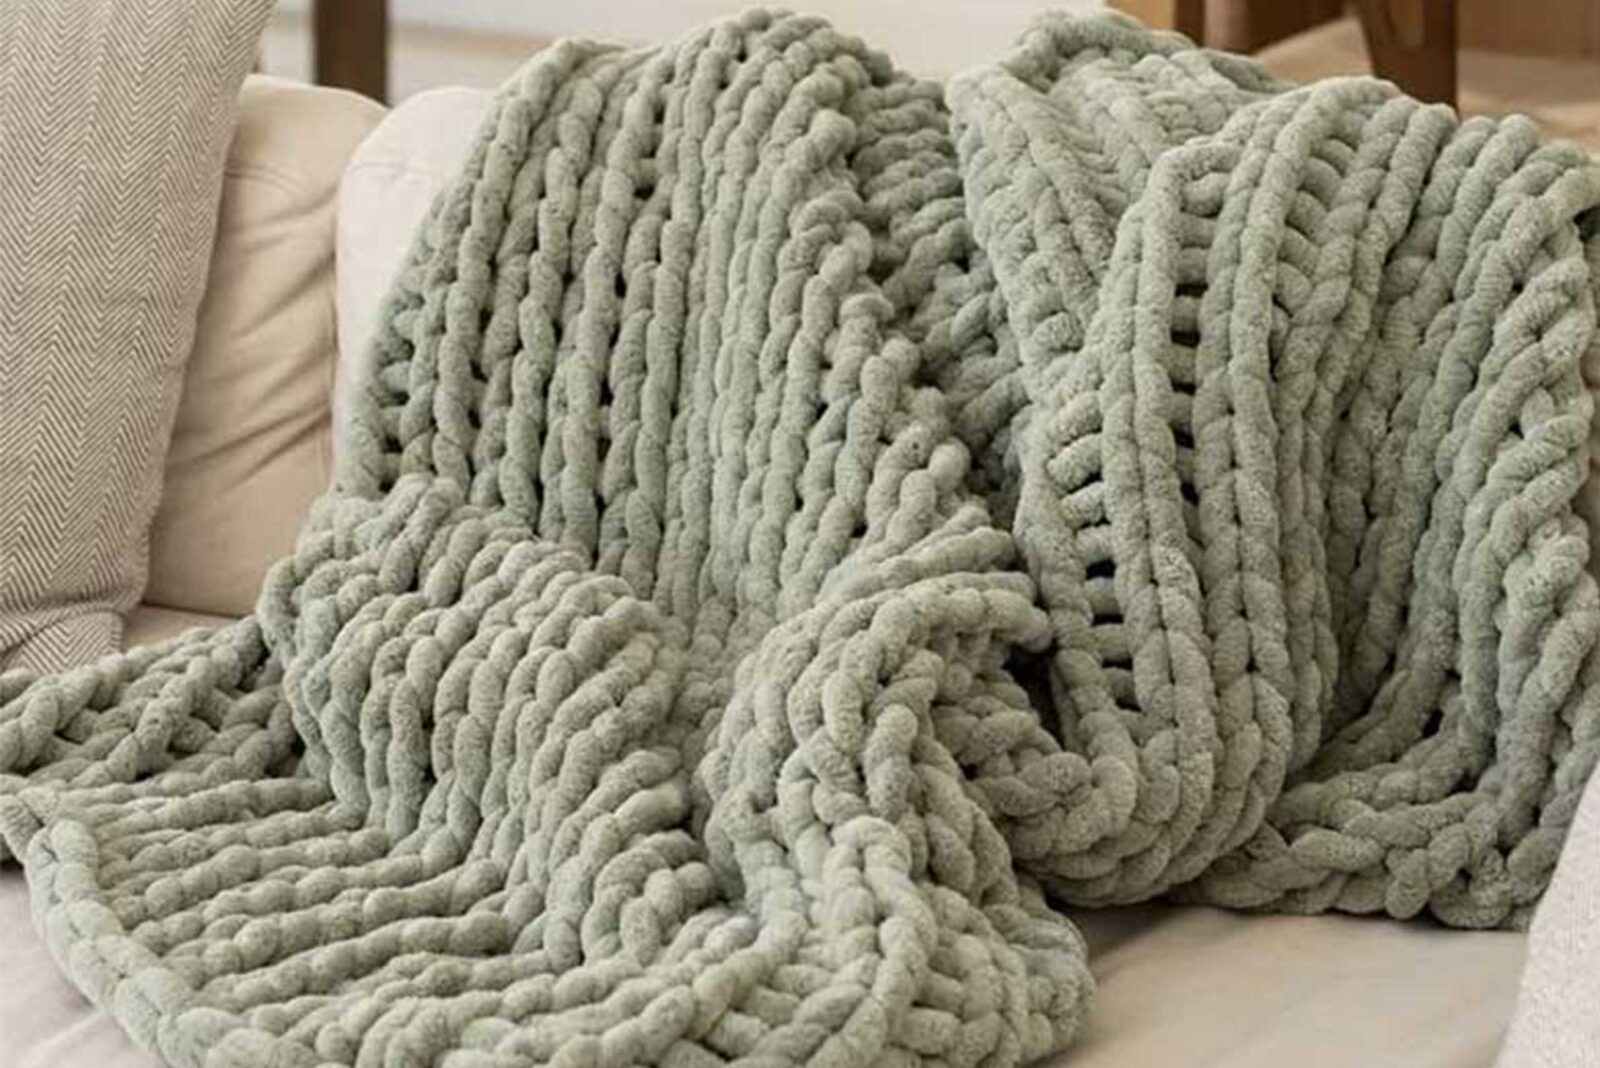 14 Cozy Blankets for the Snuggly Season